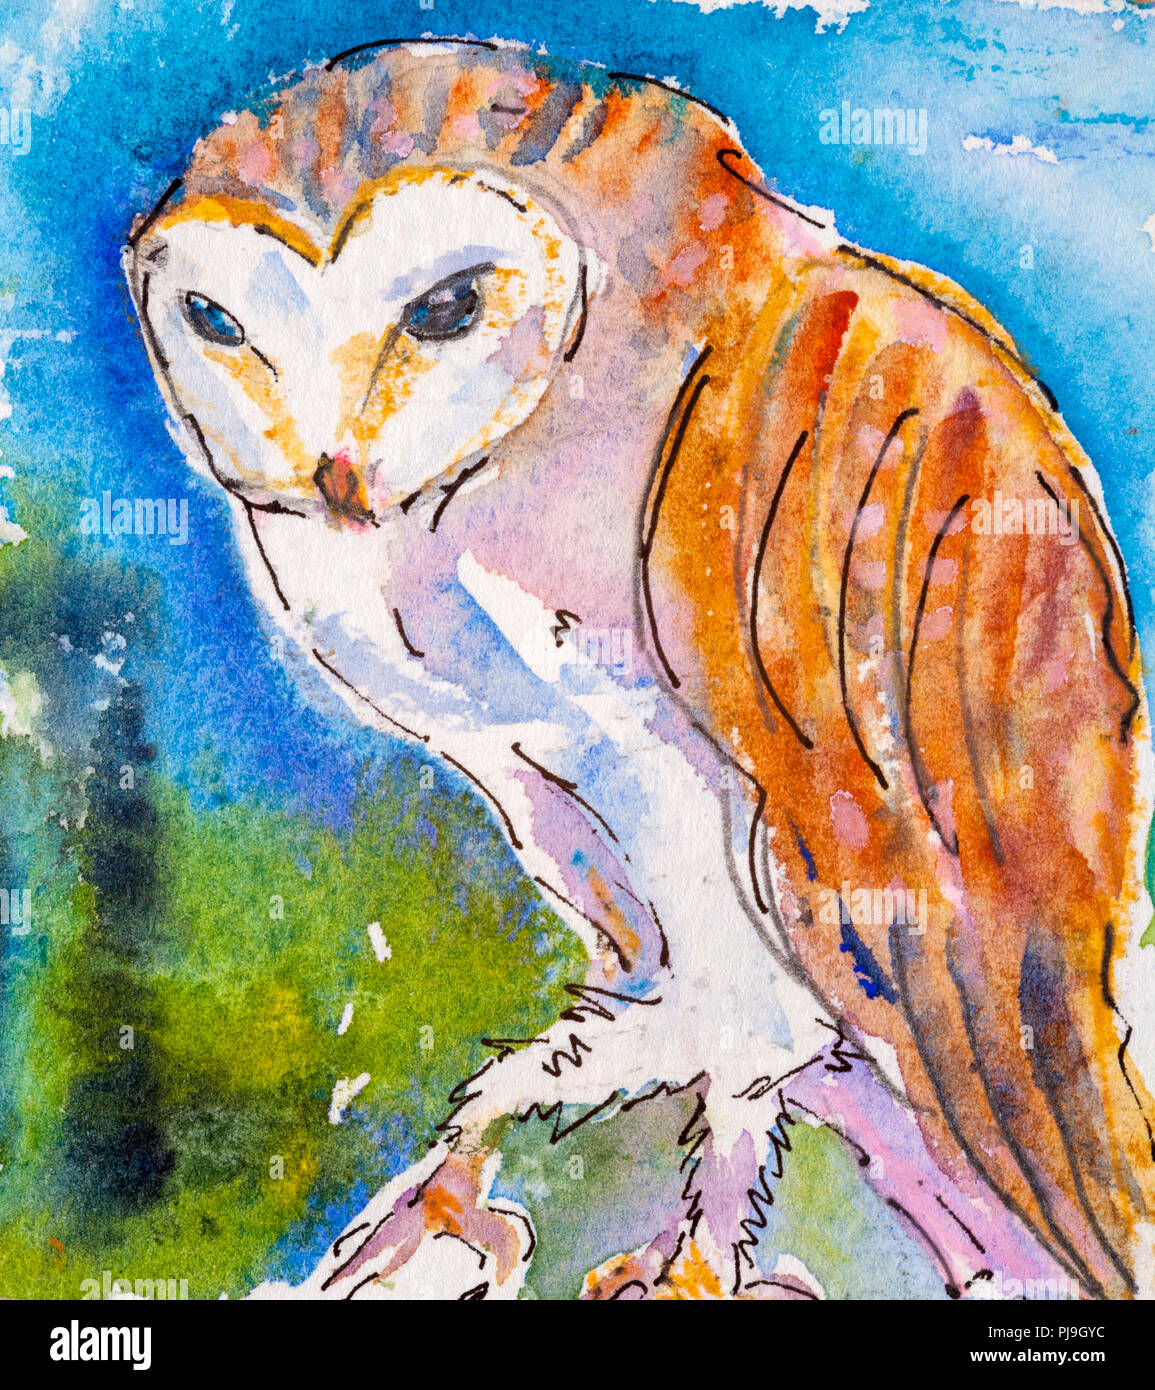 Details of watercolour painting studies for a wildlife illustration project showing colour, textures and techniques. An owl. Stock Photo